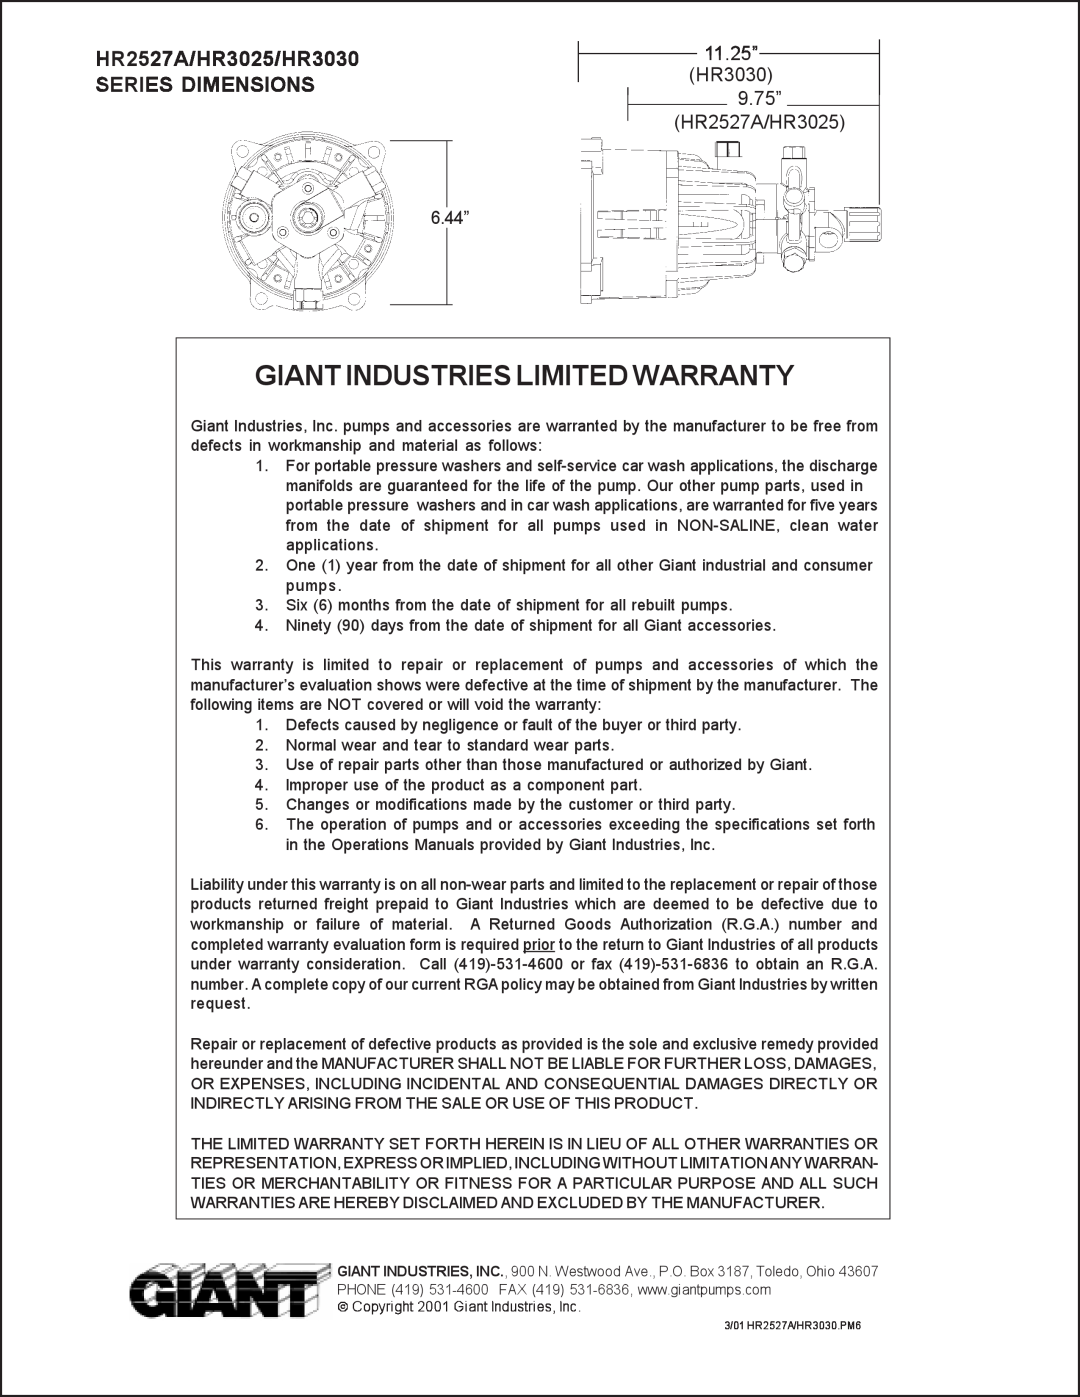 Giant operating instructions Giant Industries Limited Warranty, HR2527A/HR3025/HR3030 SERIES DIMENSIONS 